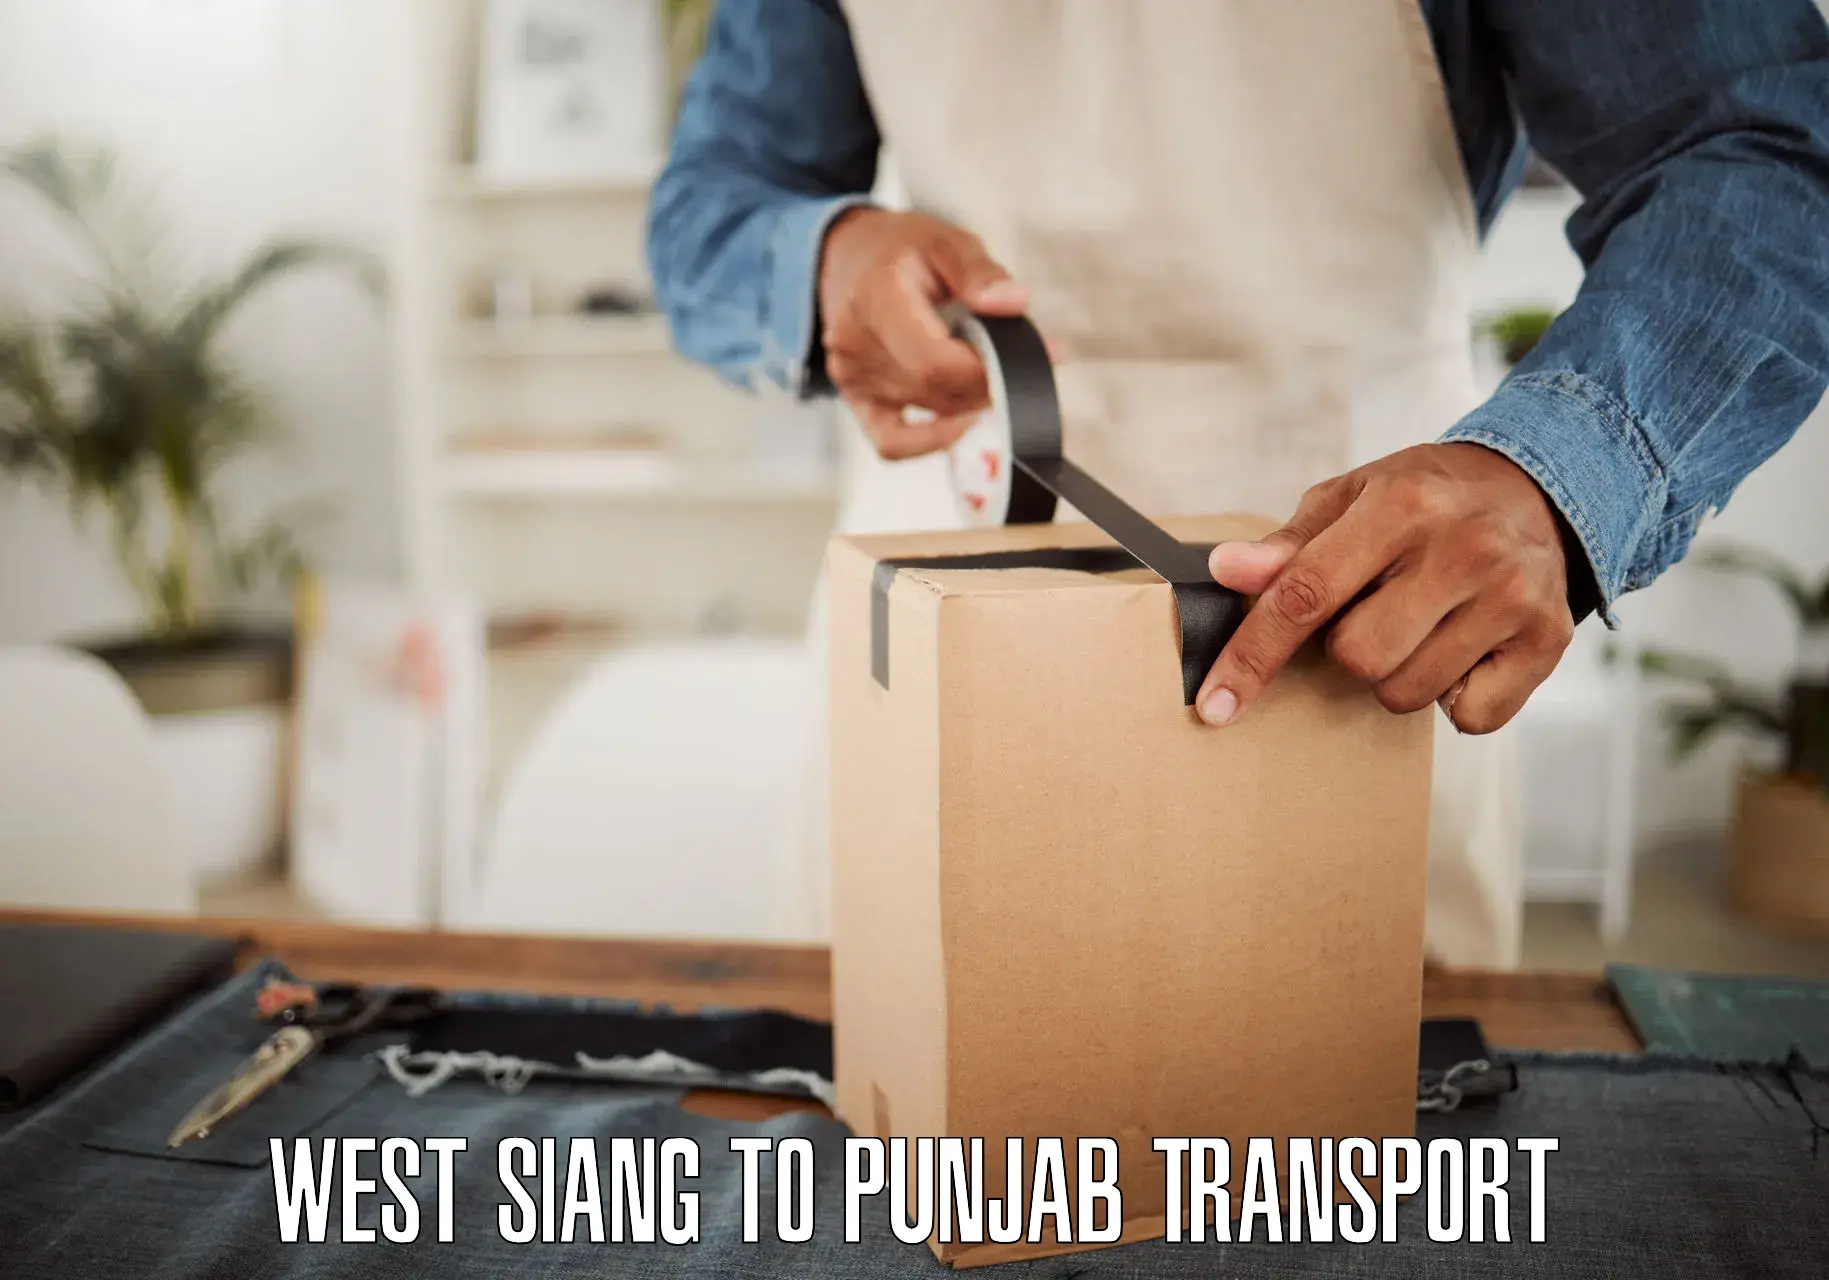 Commercial transport service West Siang to Khanna